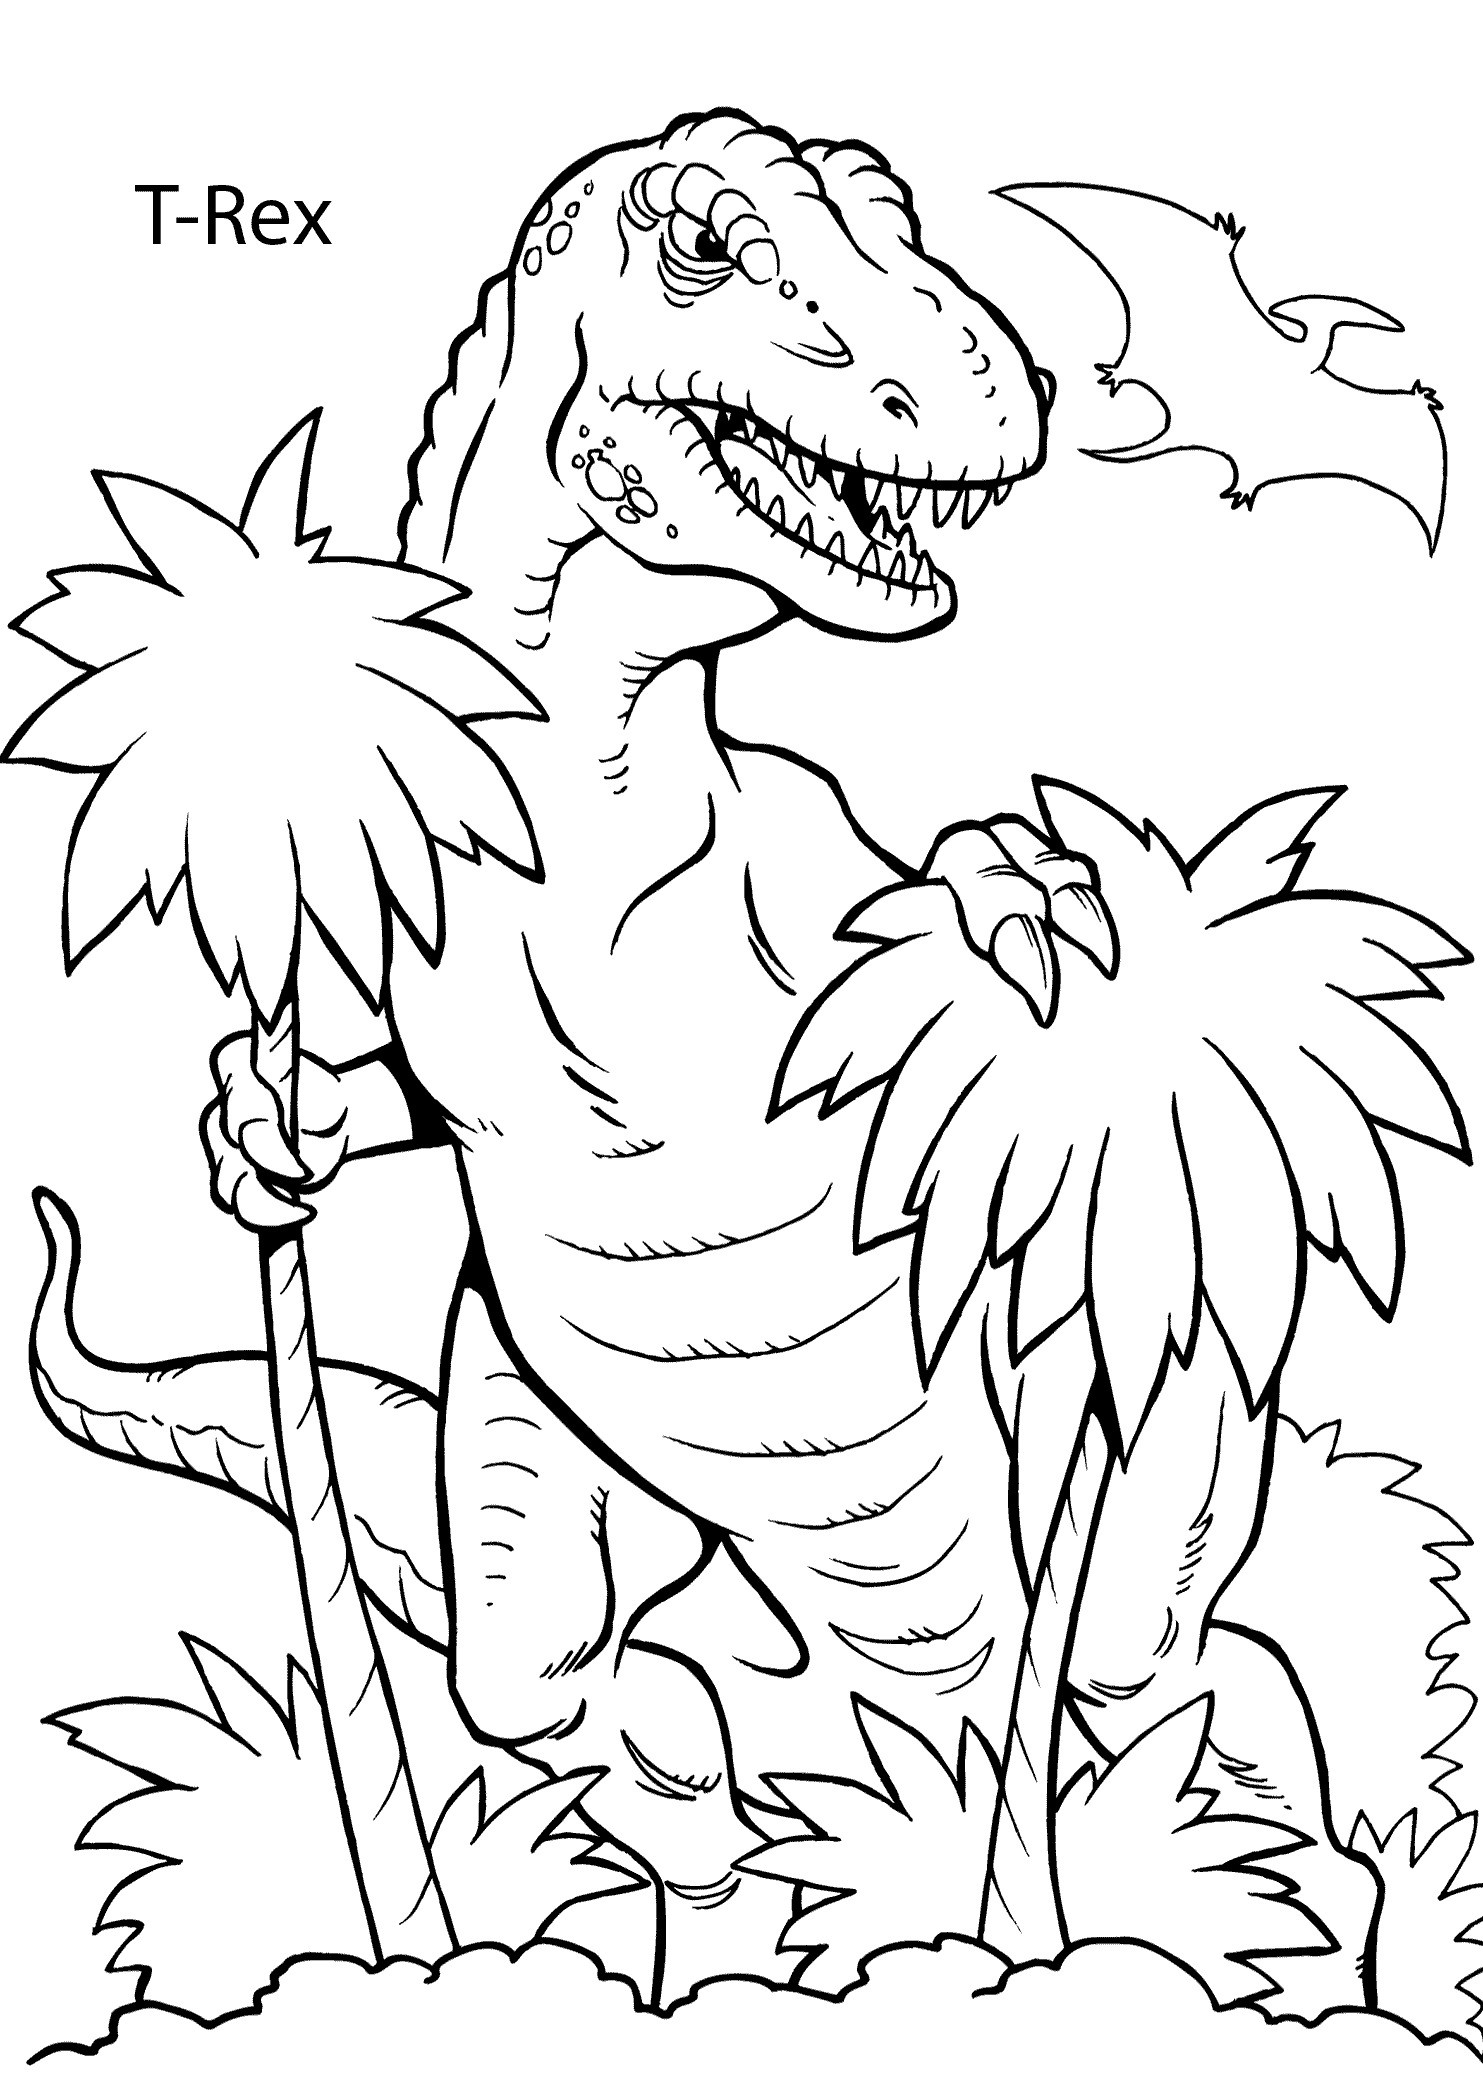 T Rex dinosaur coloring pages for kids printable free summerlearning sweepstakes